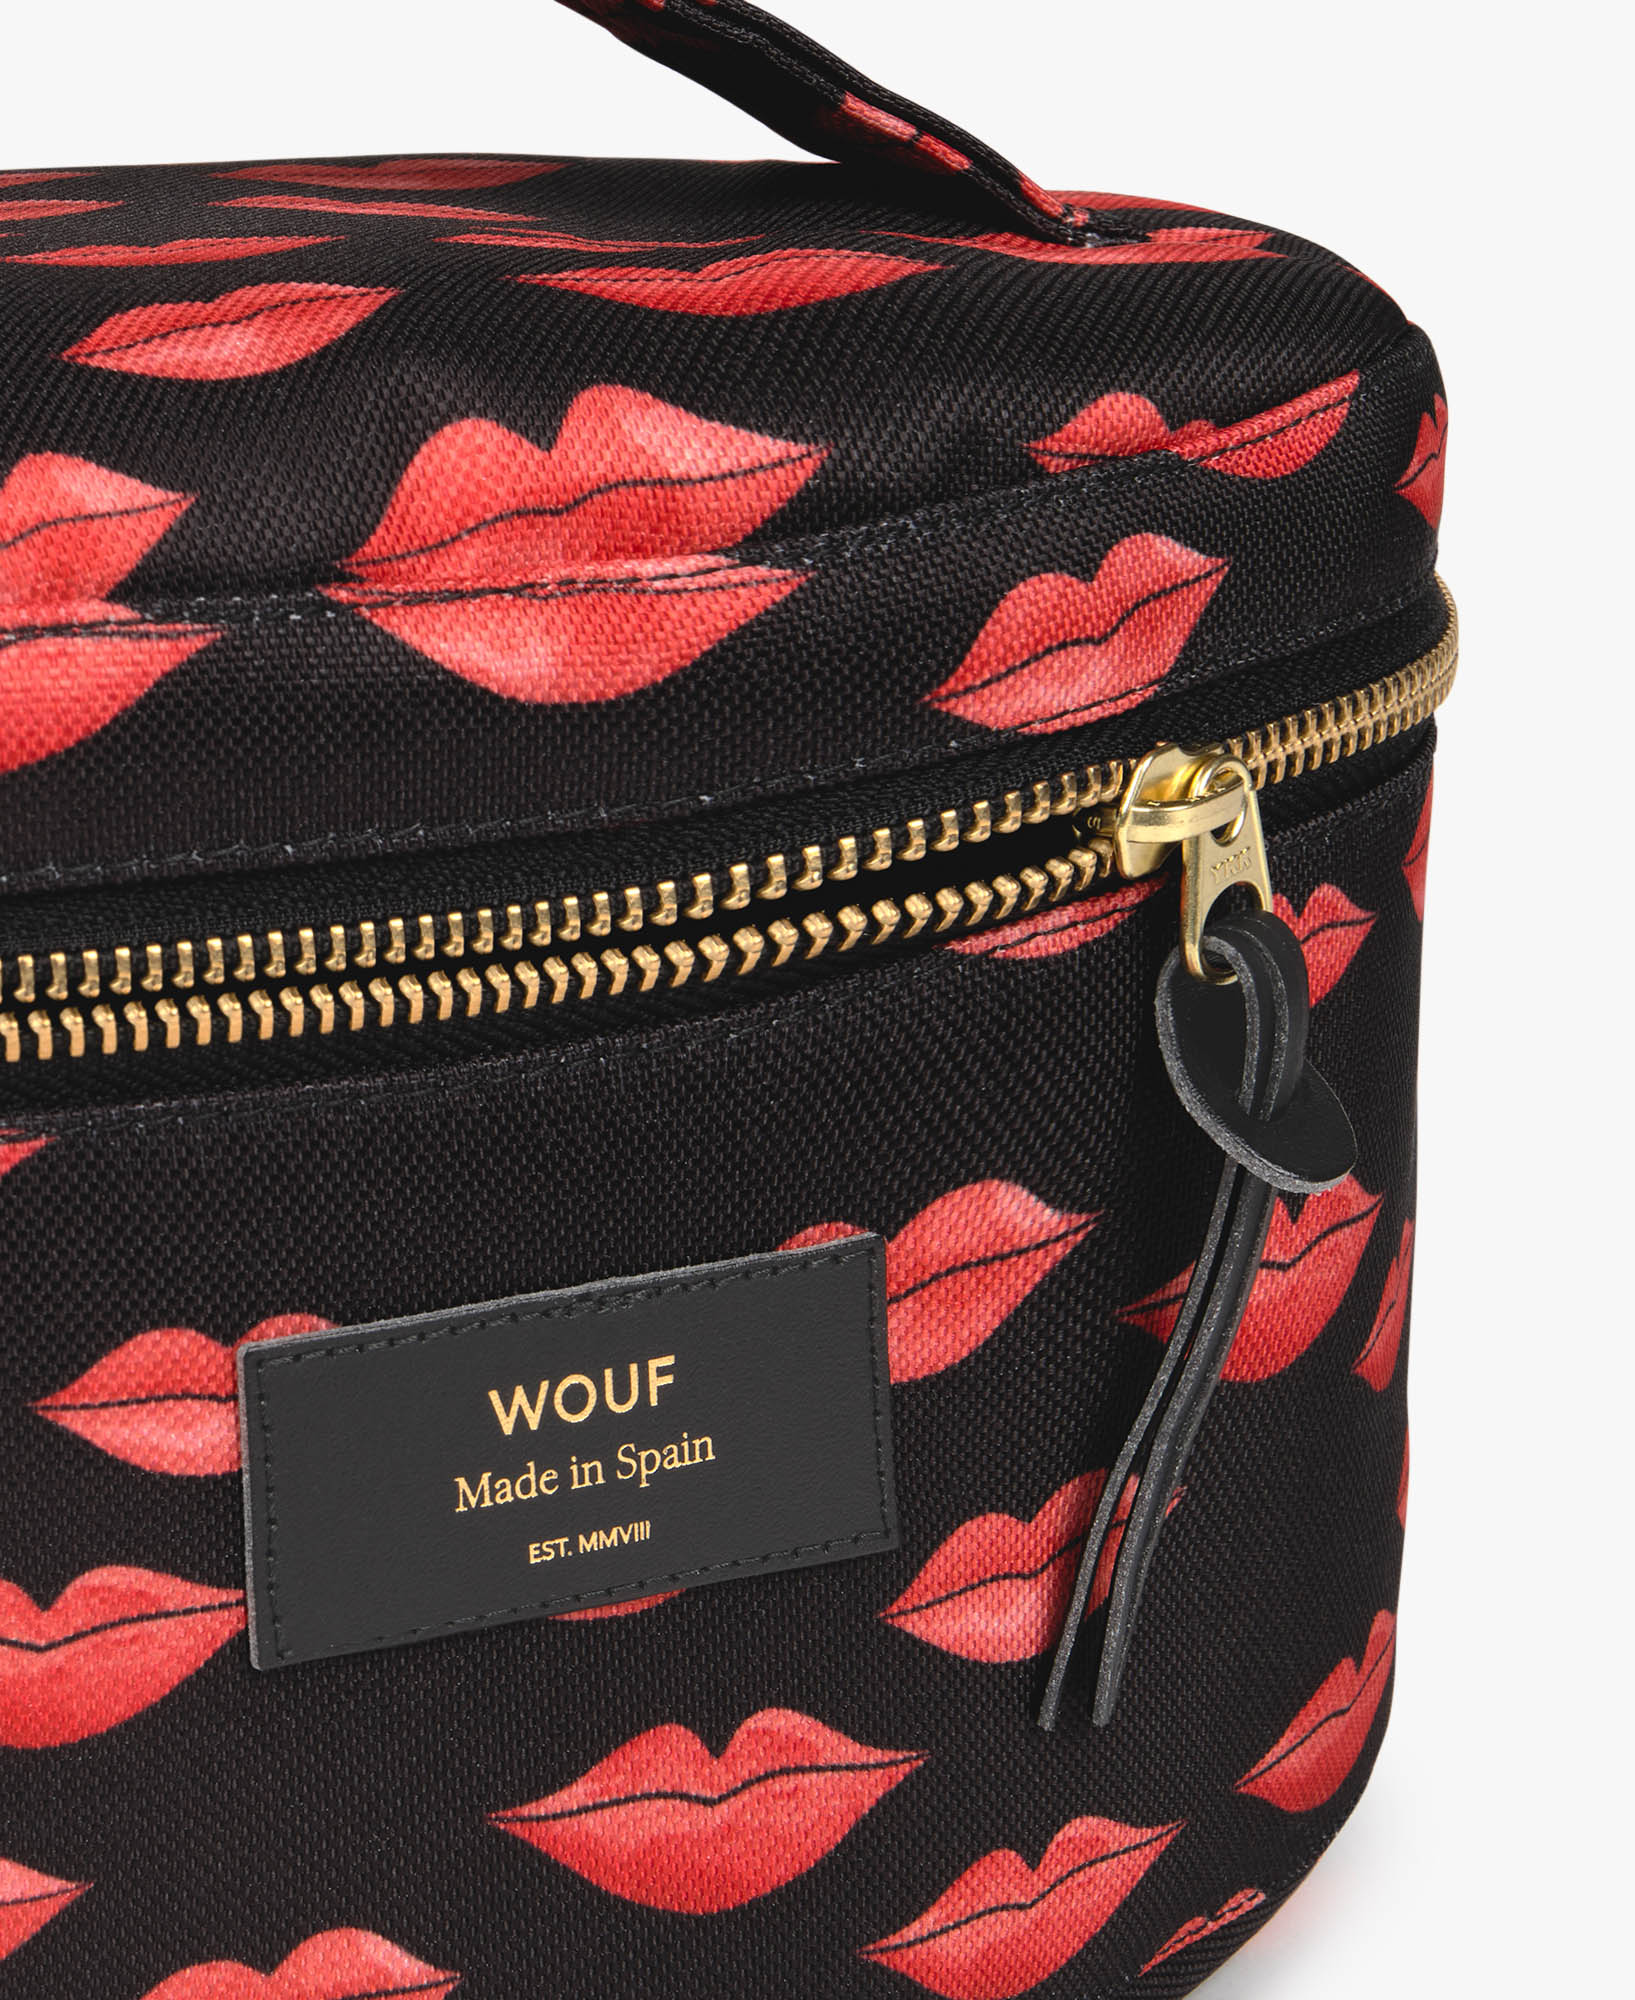 WOUF-XL-Makeup-Bag-Beso-Label